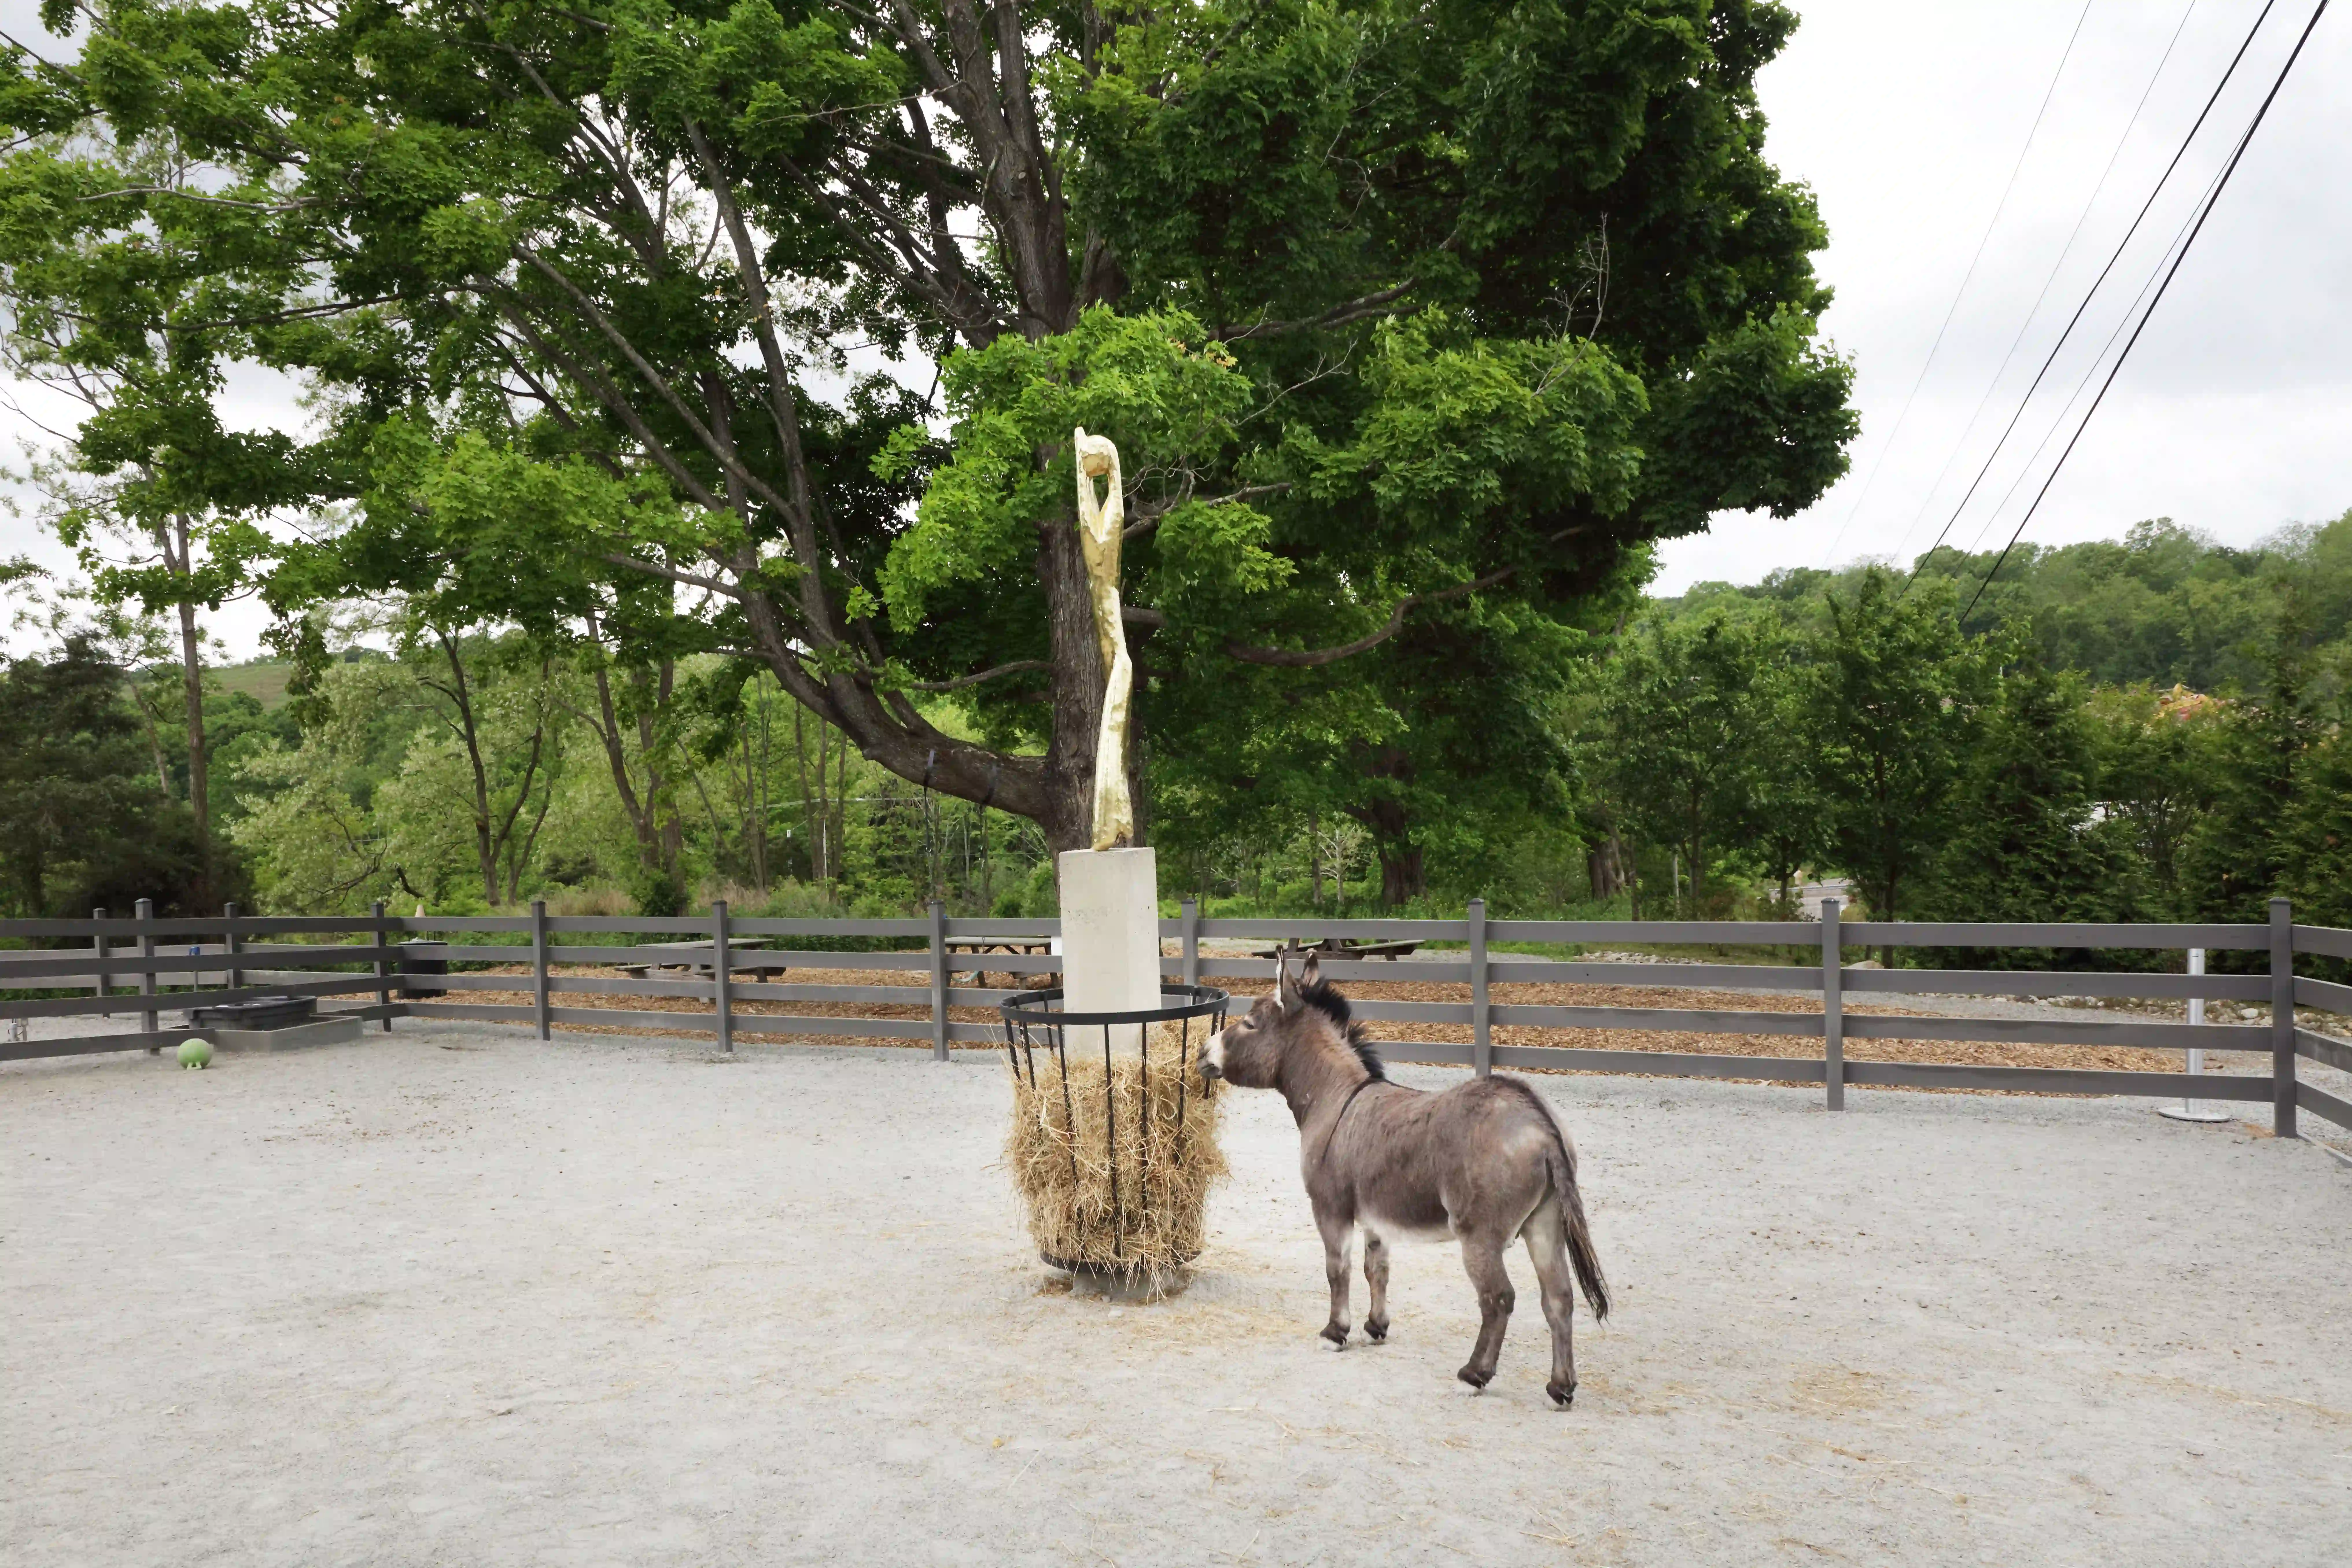 Donkey in front of a commissioned sculpture, Namsal Siedlecki’s Trevis Maponos, an installation featuring a concrete base and hay feeder